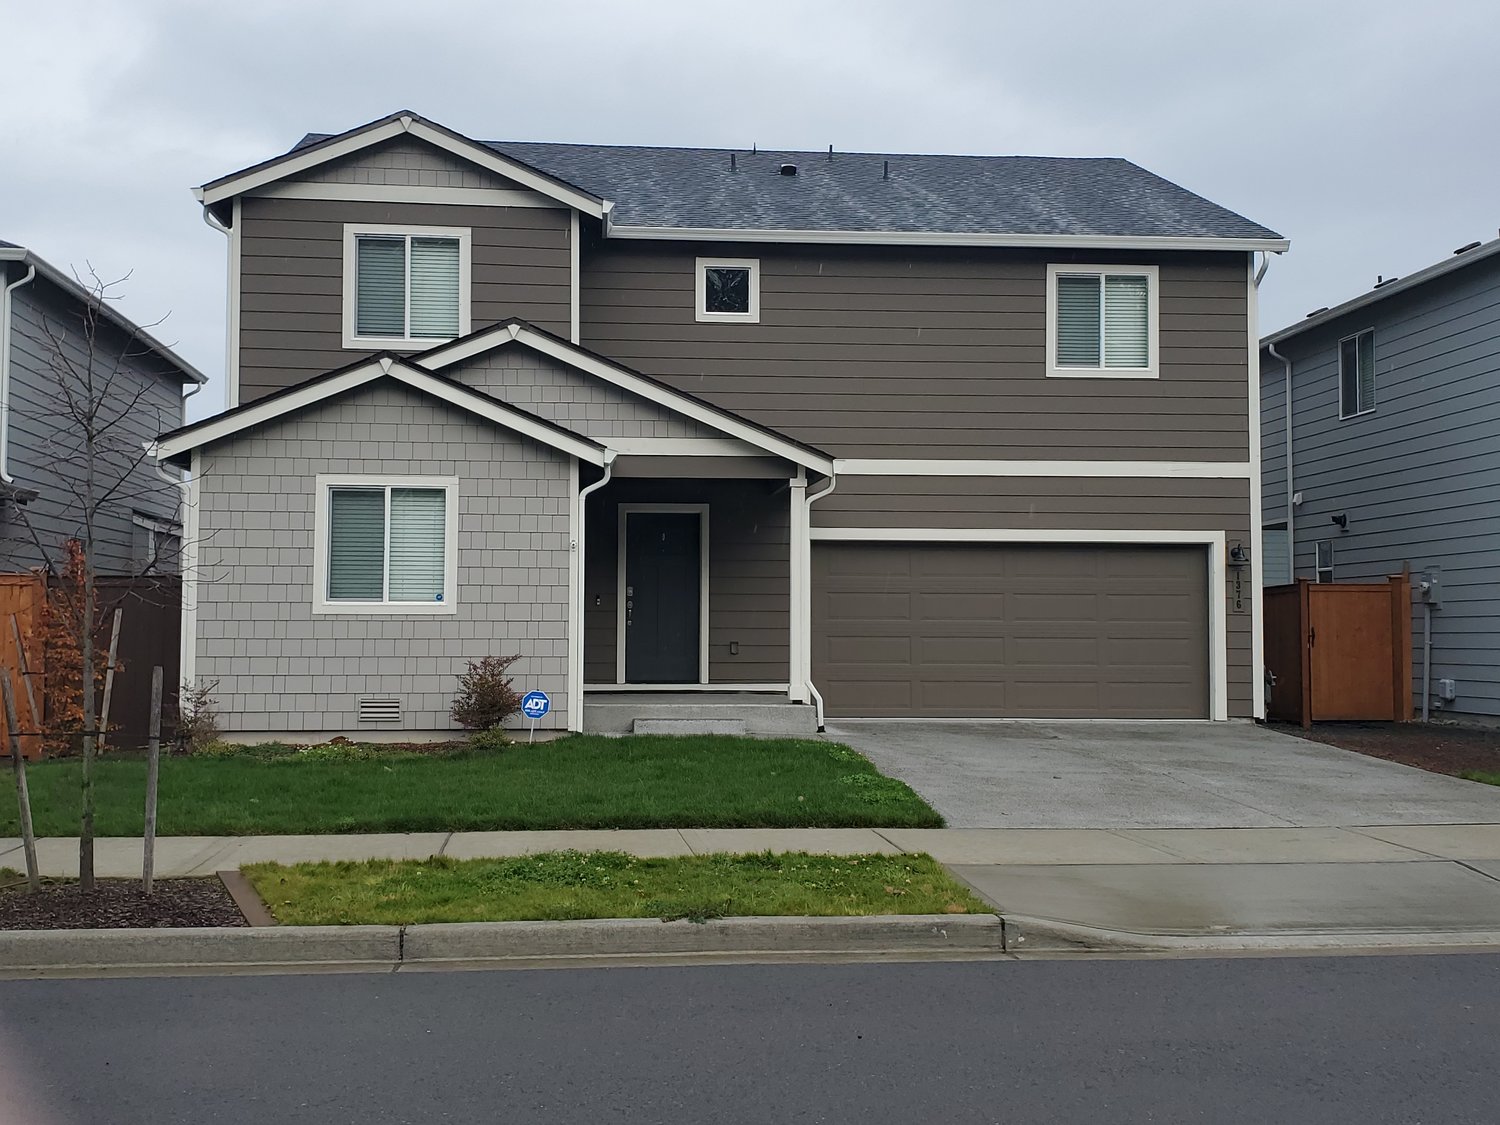 This home at 1376 92nd Way SE in Tumwater was sold by Max Torres-Pinto for $523,000.